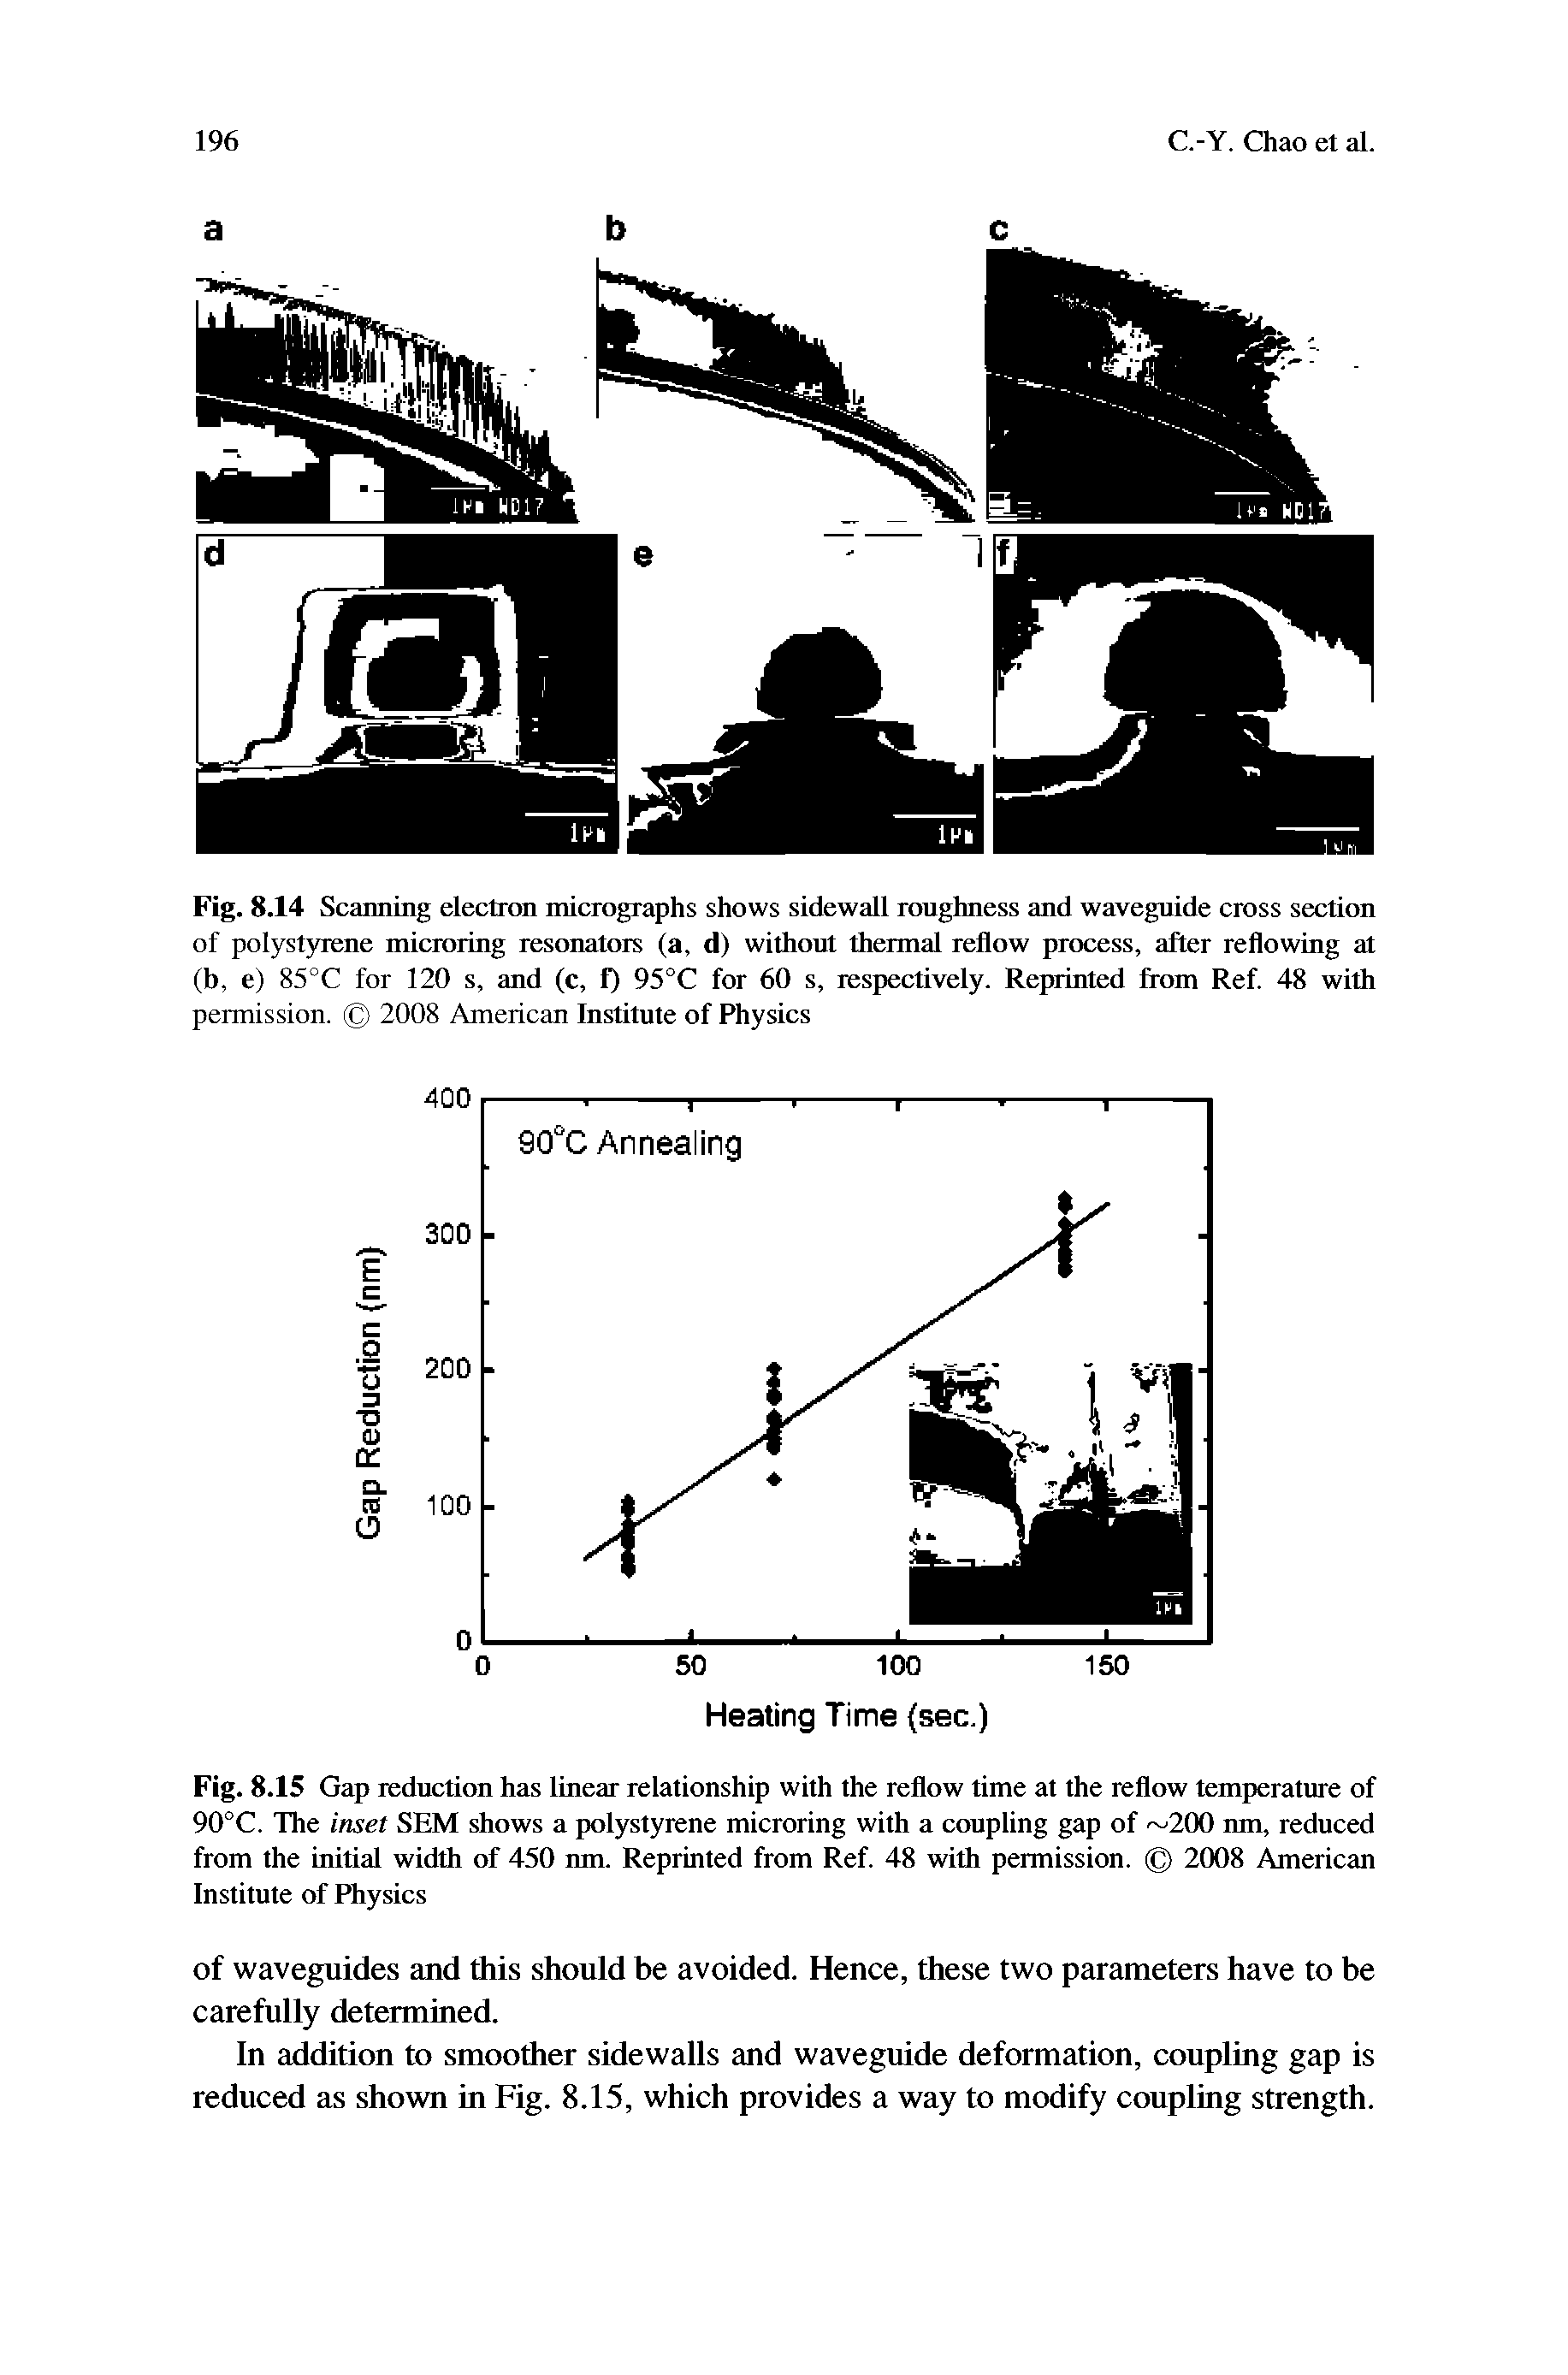 Fig. 8.15 Gap reduction has linear relationship with the reflow time at the reflow temperature of 90°C. The inset SEM shows a polystyrene microring with a coupling gap of 200 nm, reduced from the initial width of 450 nm. Reprinted from Ref. 48 with permission. 2008 American Institute of Physics...